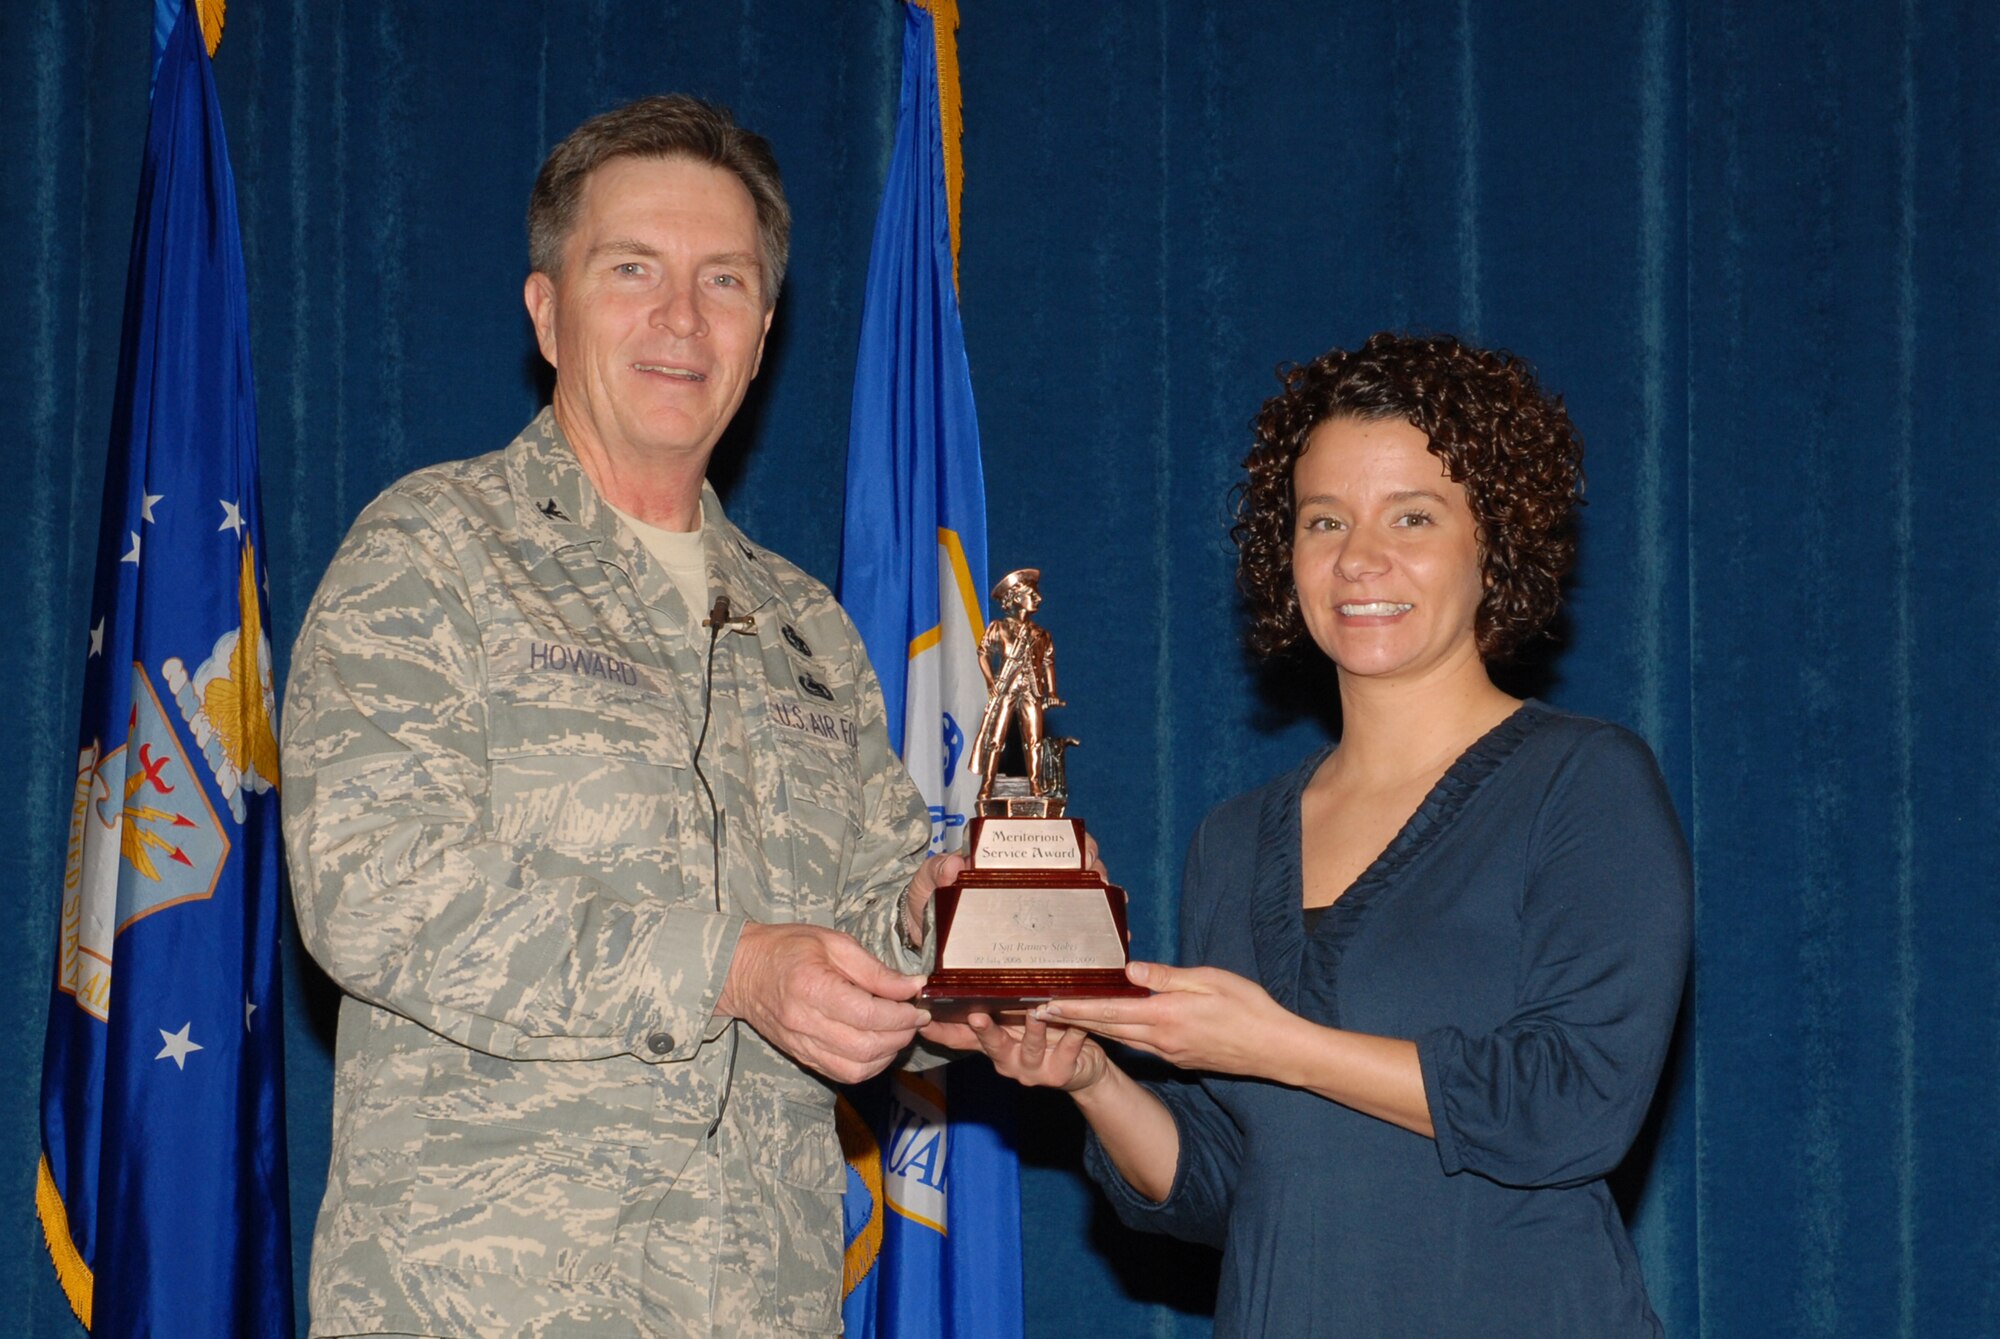 McGHEE TYSON AIR NATIONAL GUARD BASE, Tenn. -- Tech. Sgt. A. Ramey Stokes, right, an enlisted professional military education instructor, receives the meritorious service award from Col. Richard B. Howard, commander, upon her departure from assignment at The I.G. Brown Air National Guard Training and Education Center here, Dec. 18, 2009.  (U.S. Air Force photograph by Master Sgt. Mavi Smith/Released)